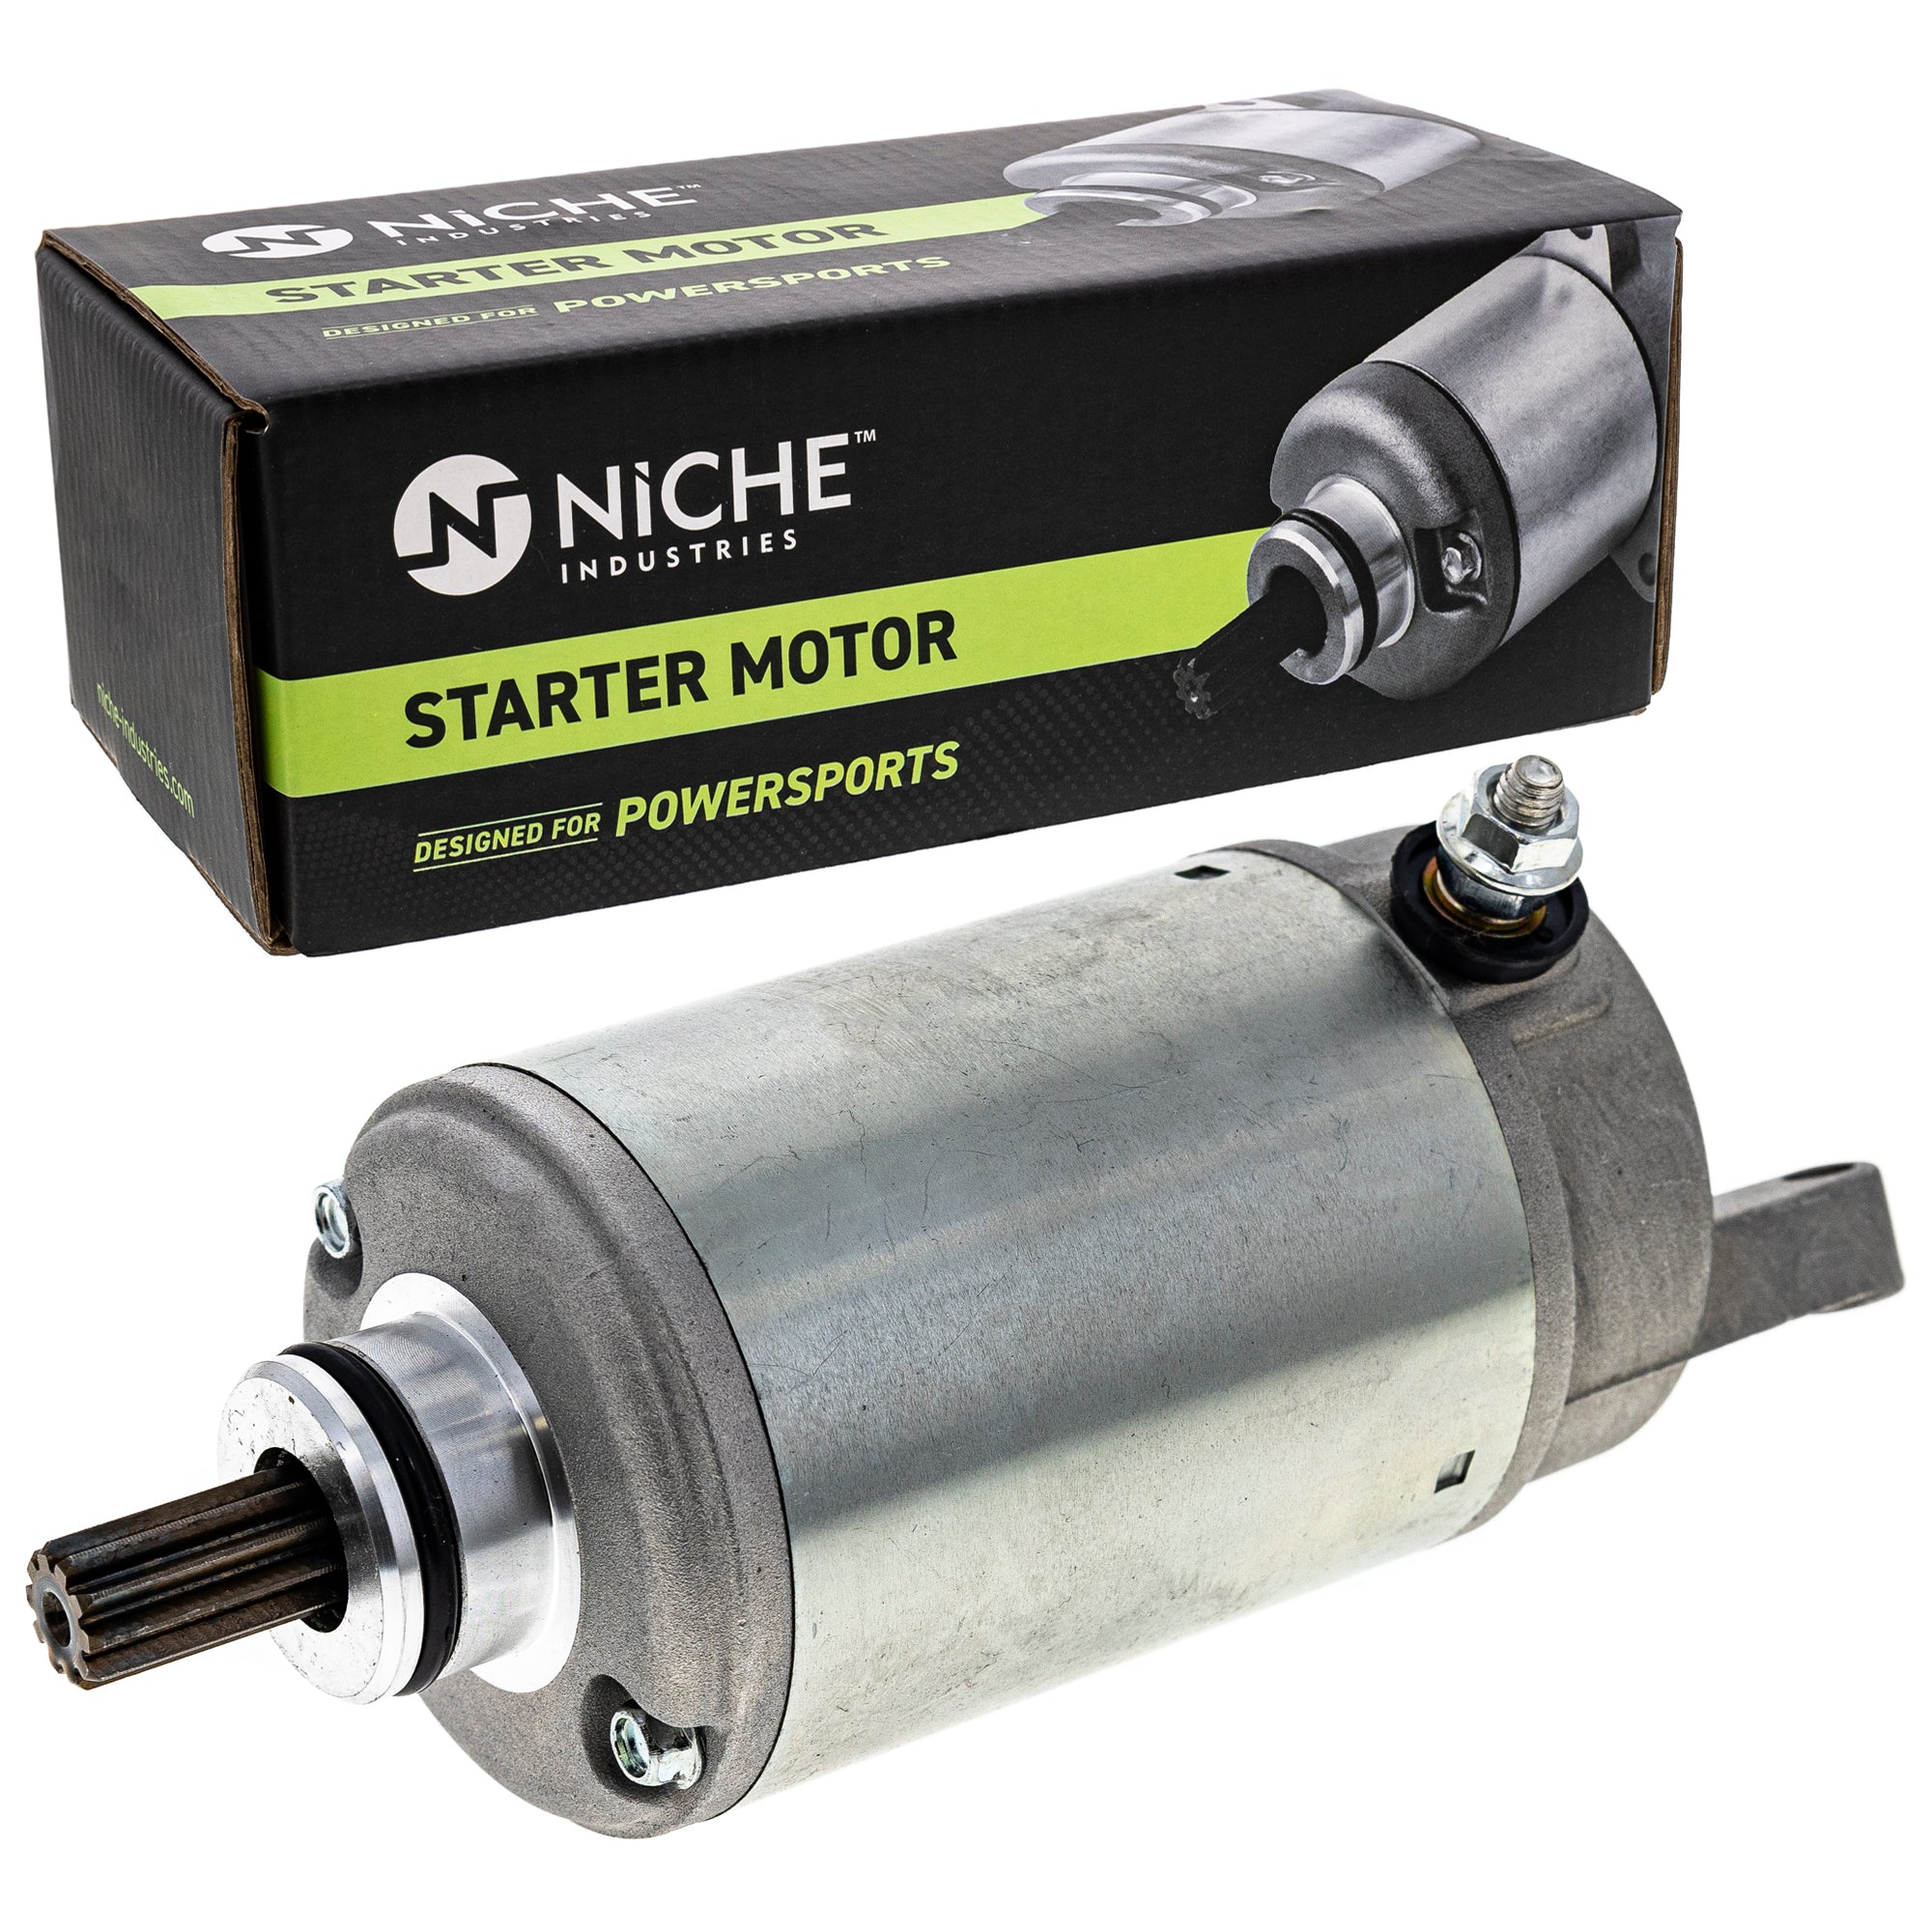 NICHE 519-CSM2562O Starter Motor Assembly for zOTHER Speed